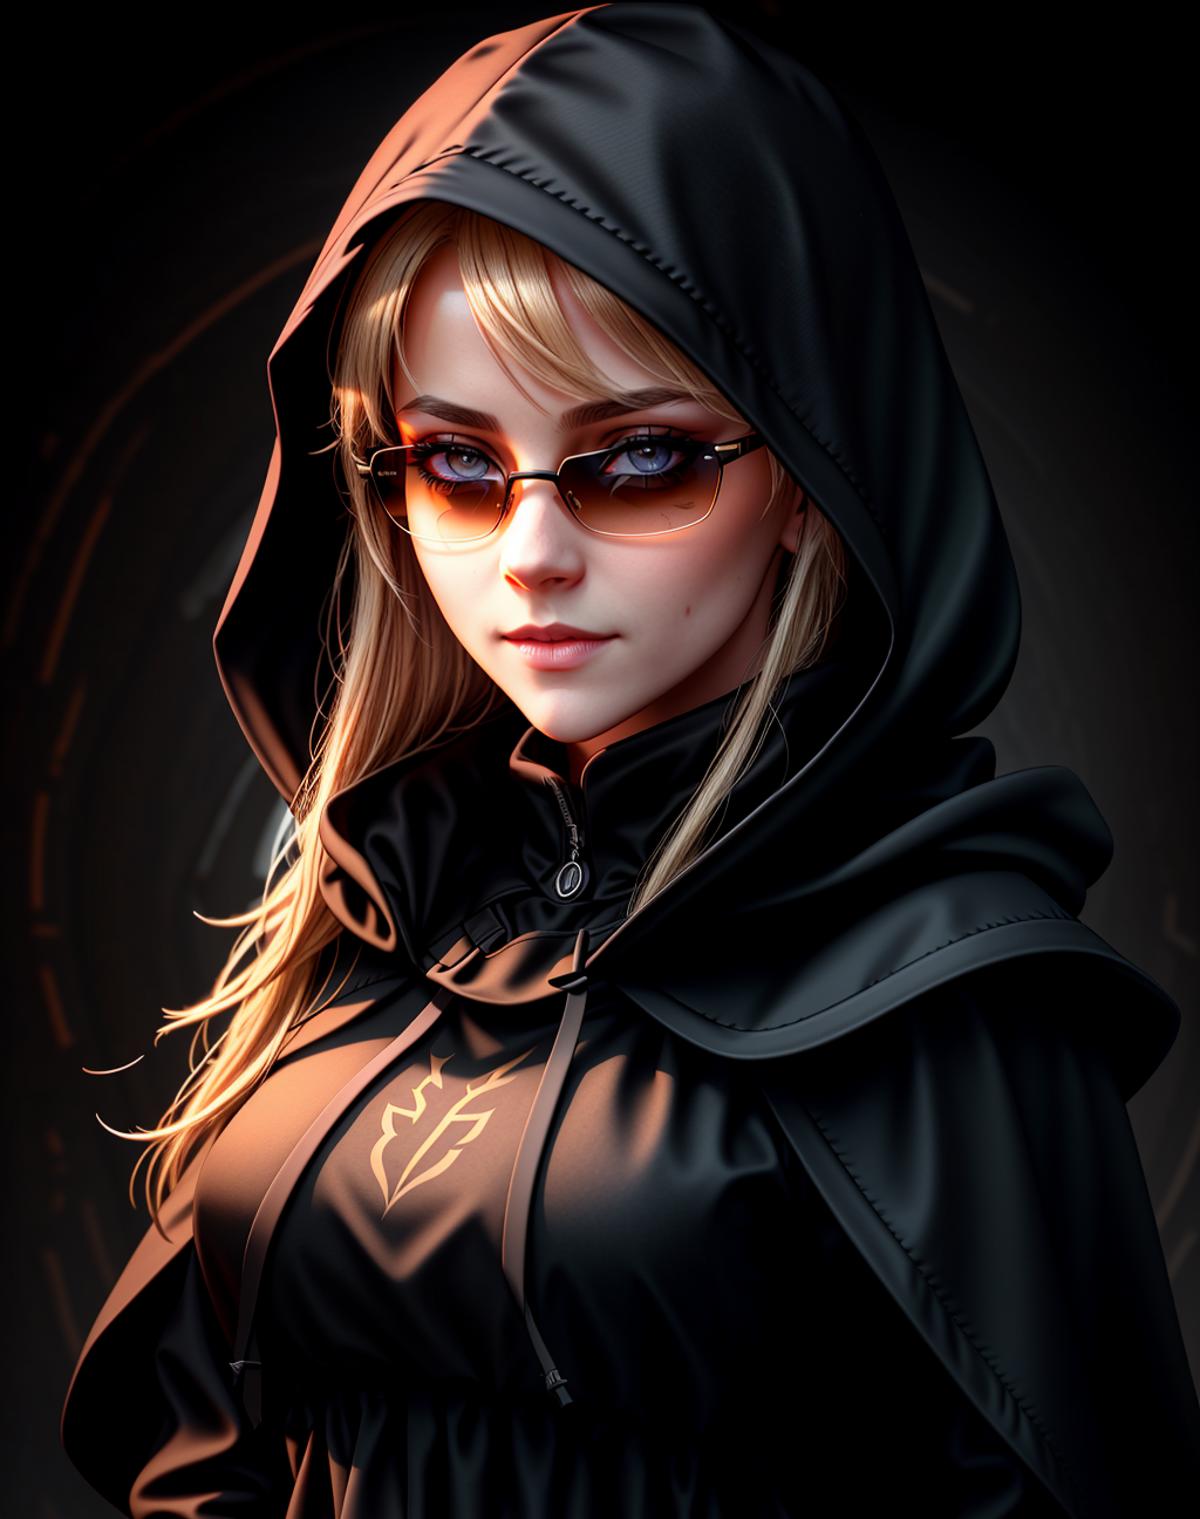 Cultist Hood - by EDG image by EDG